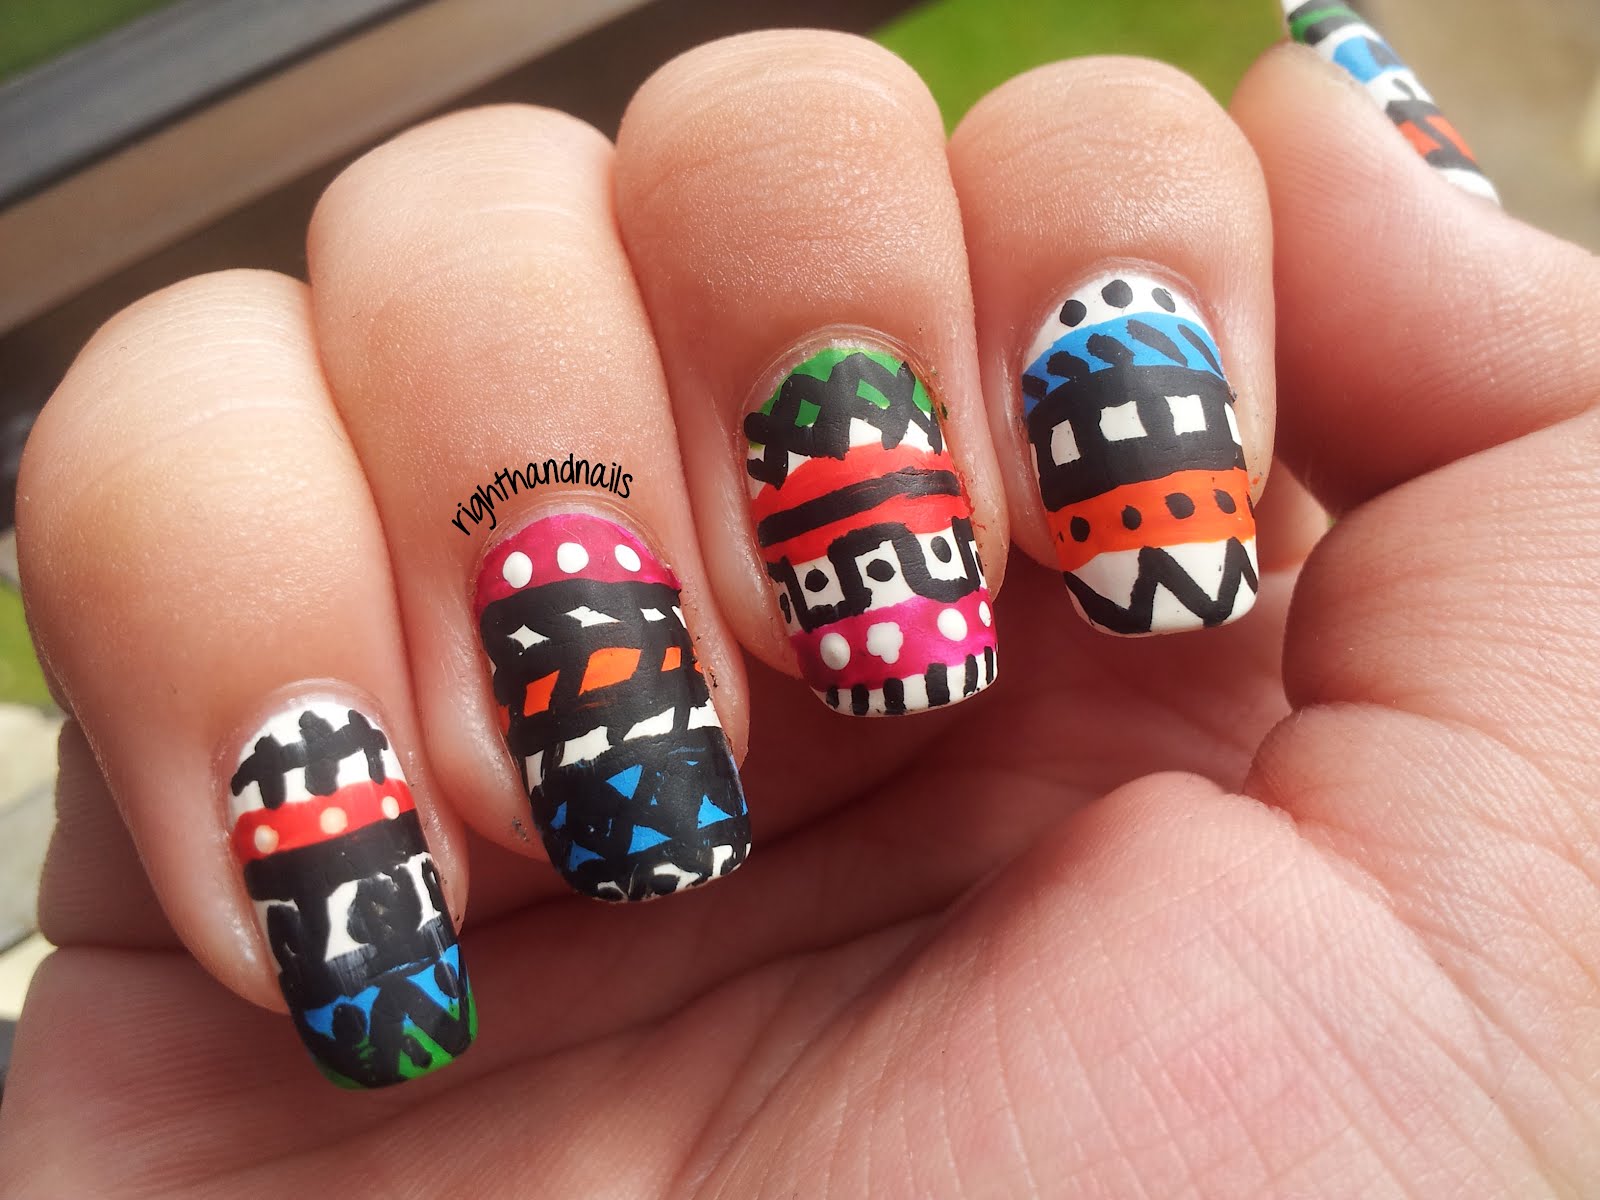 10. Tribal Nail Designs for Women - wide 1